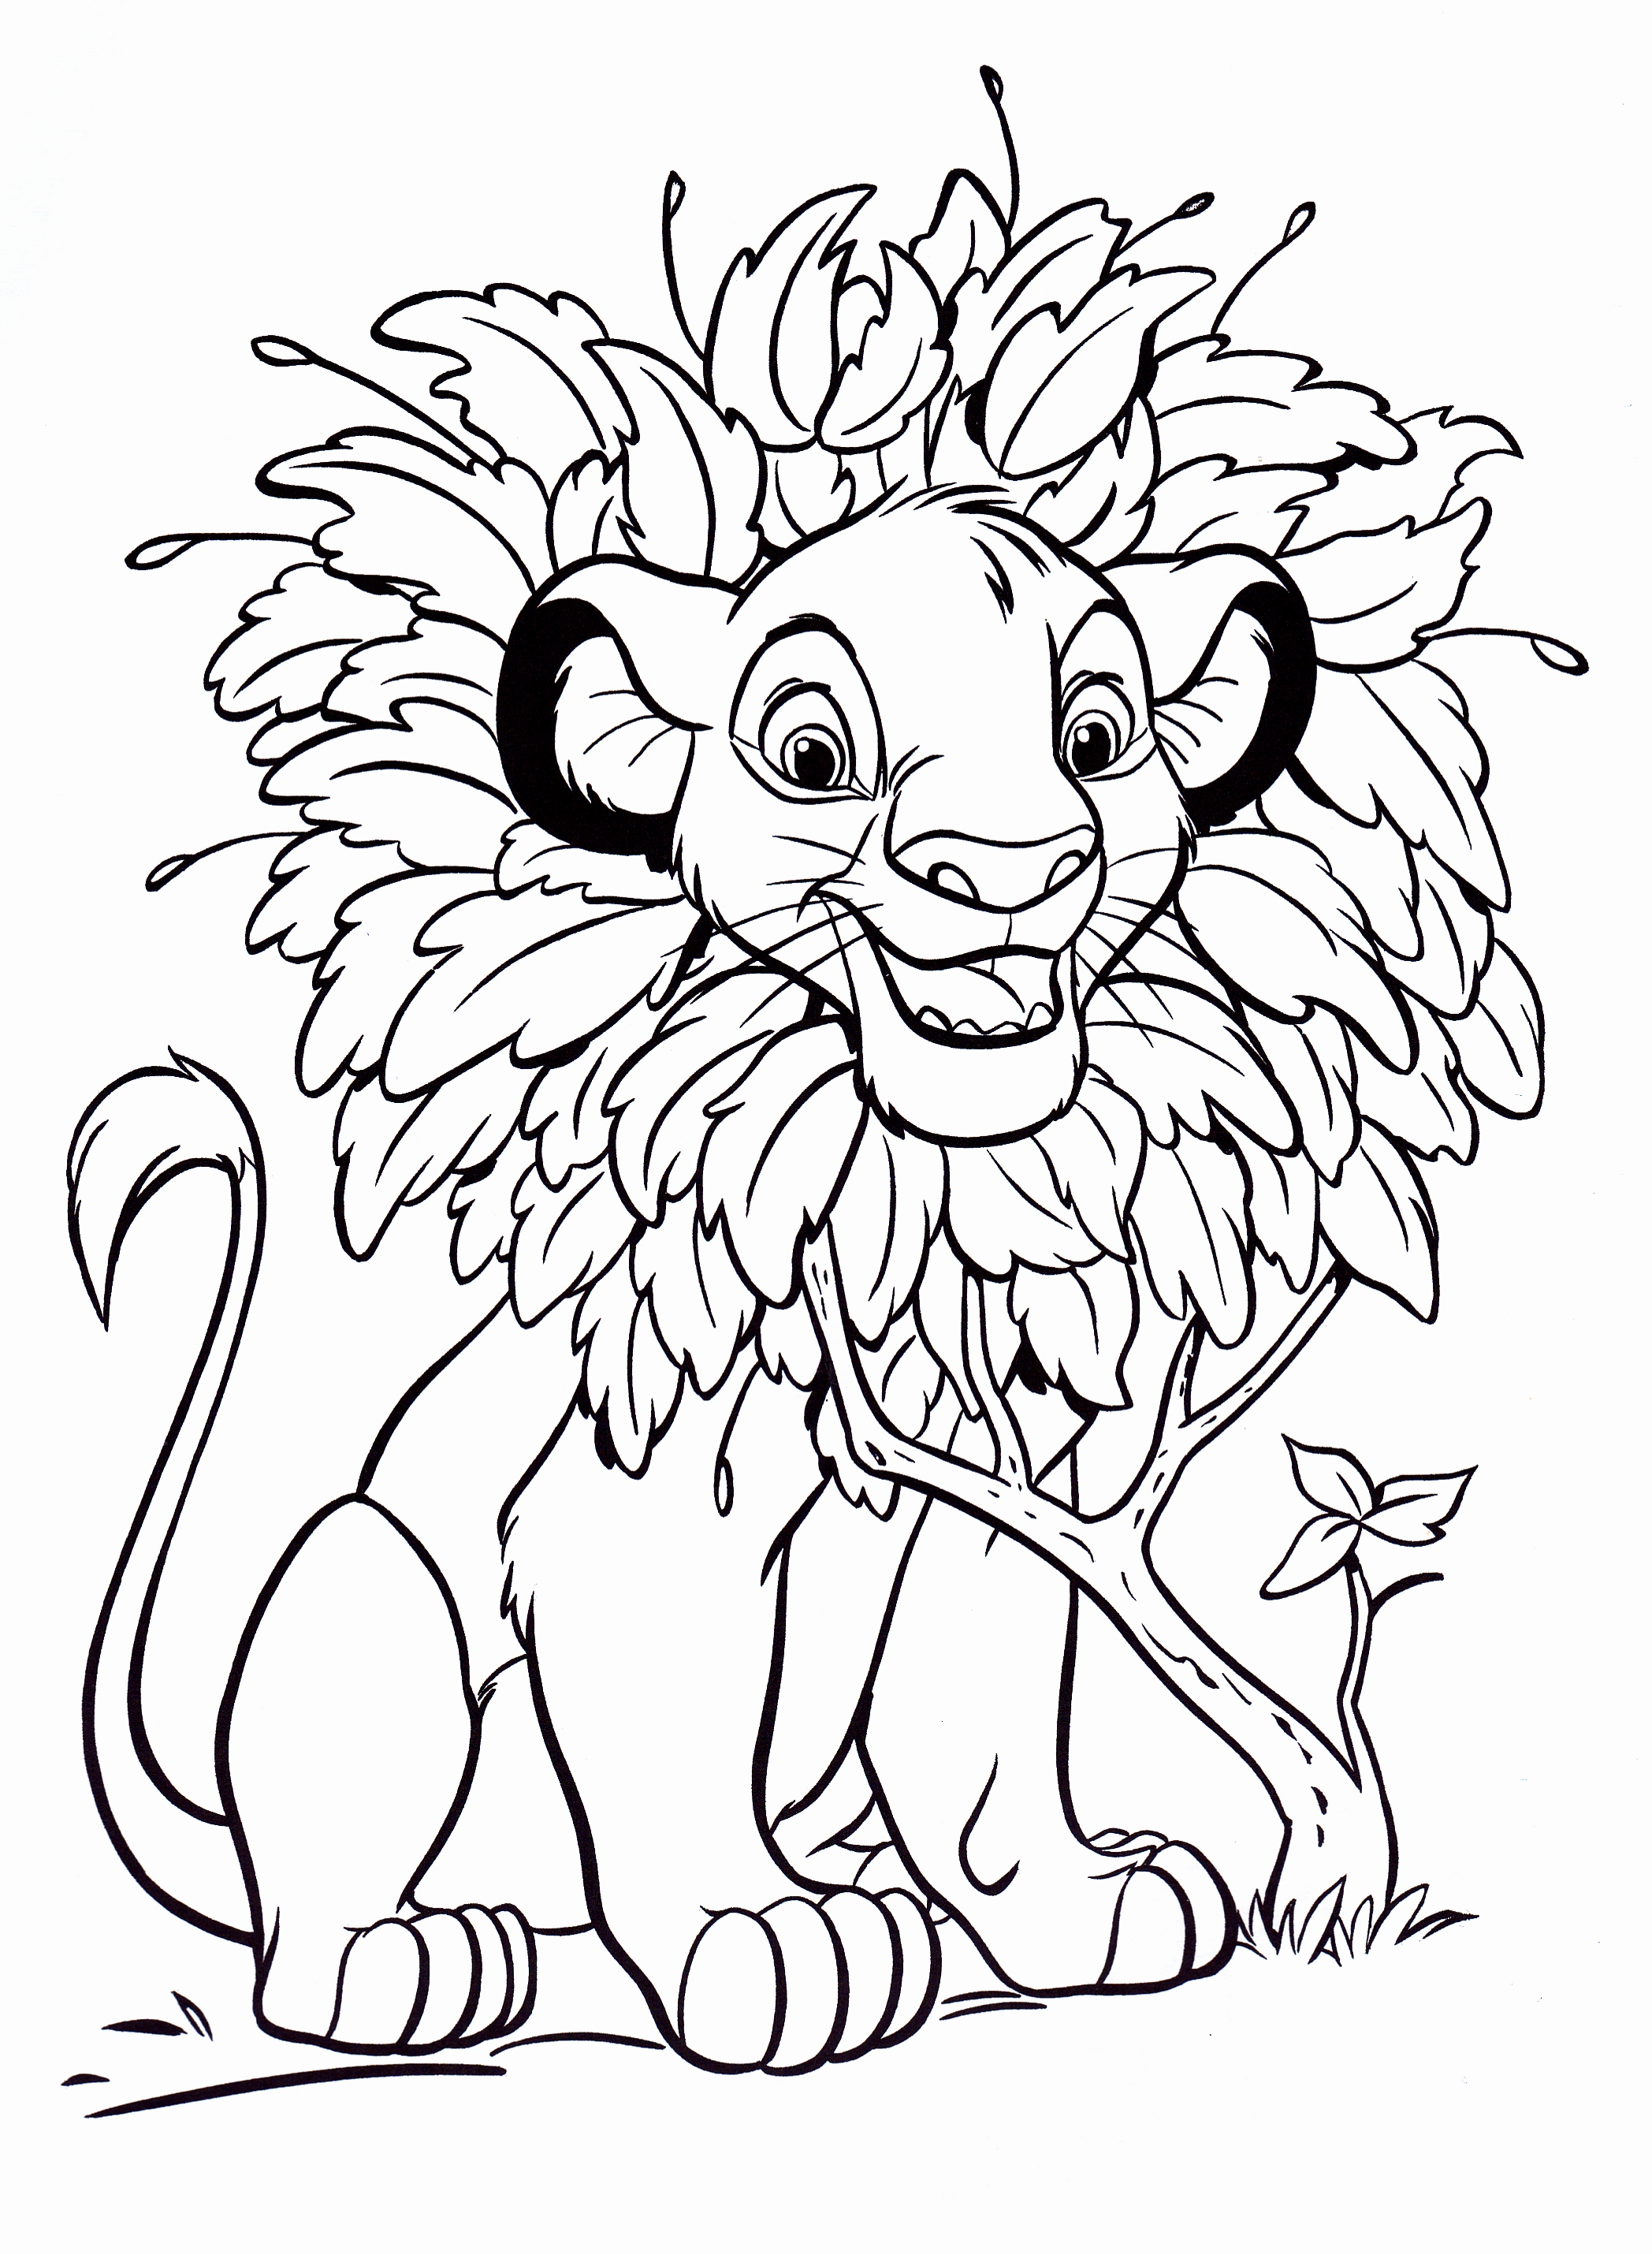 Free Online Coloring Sheets Printable